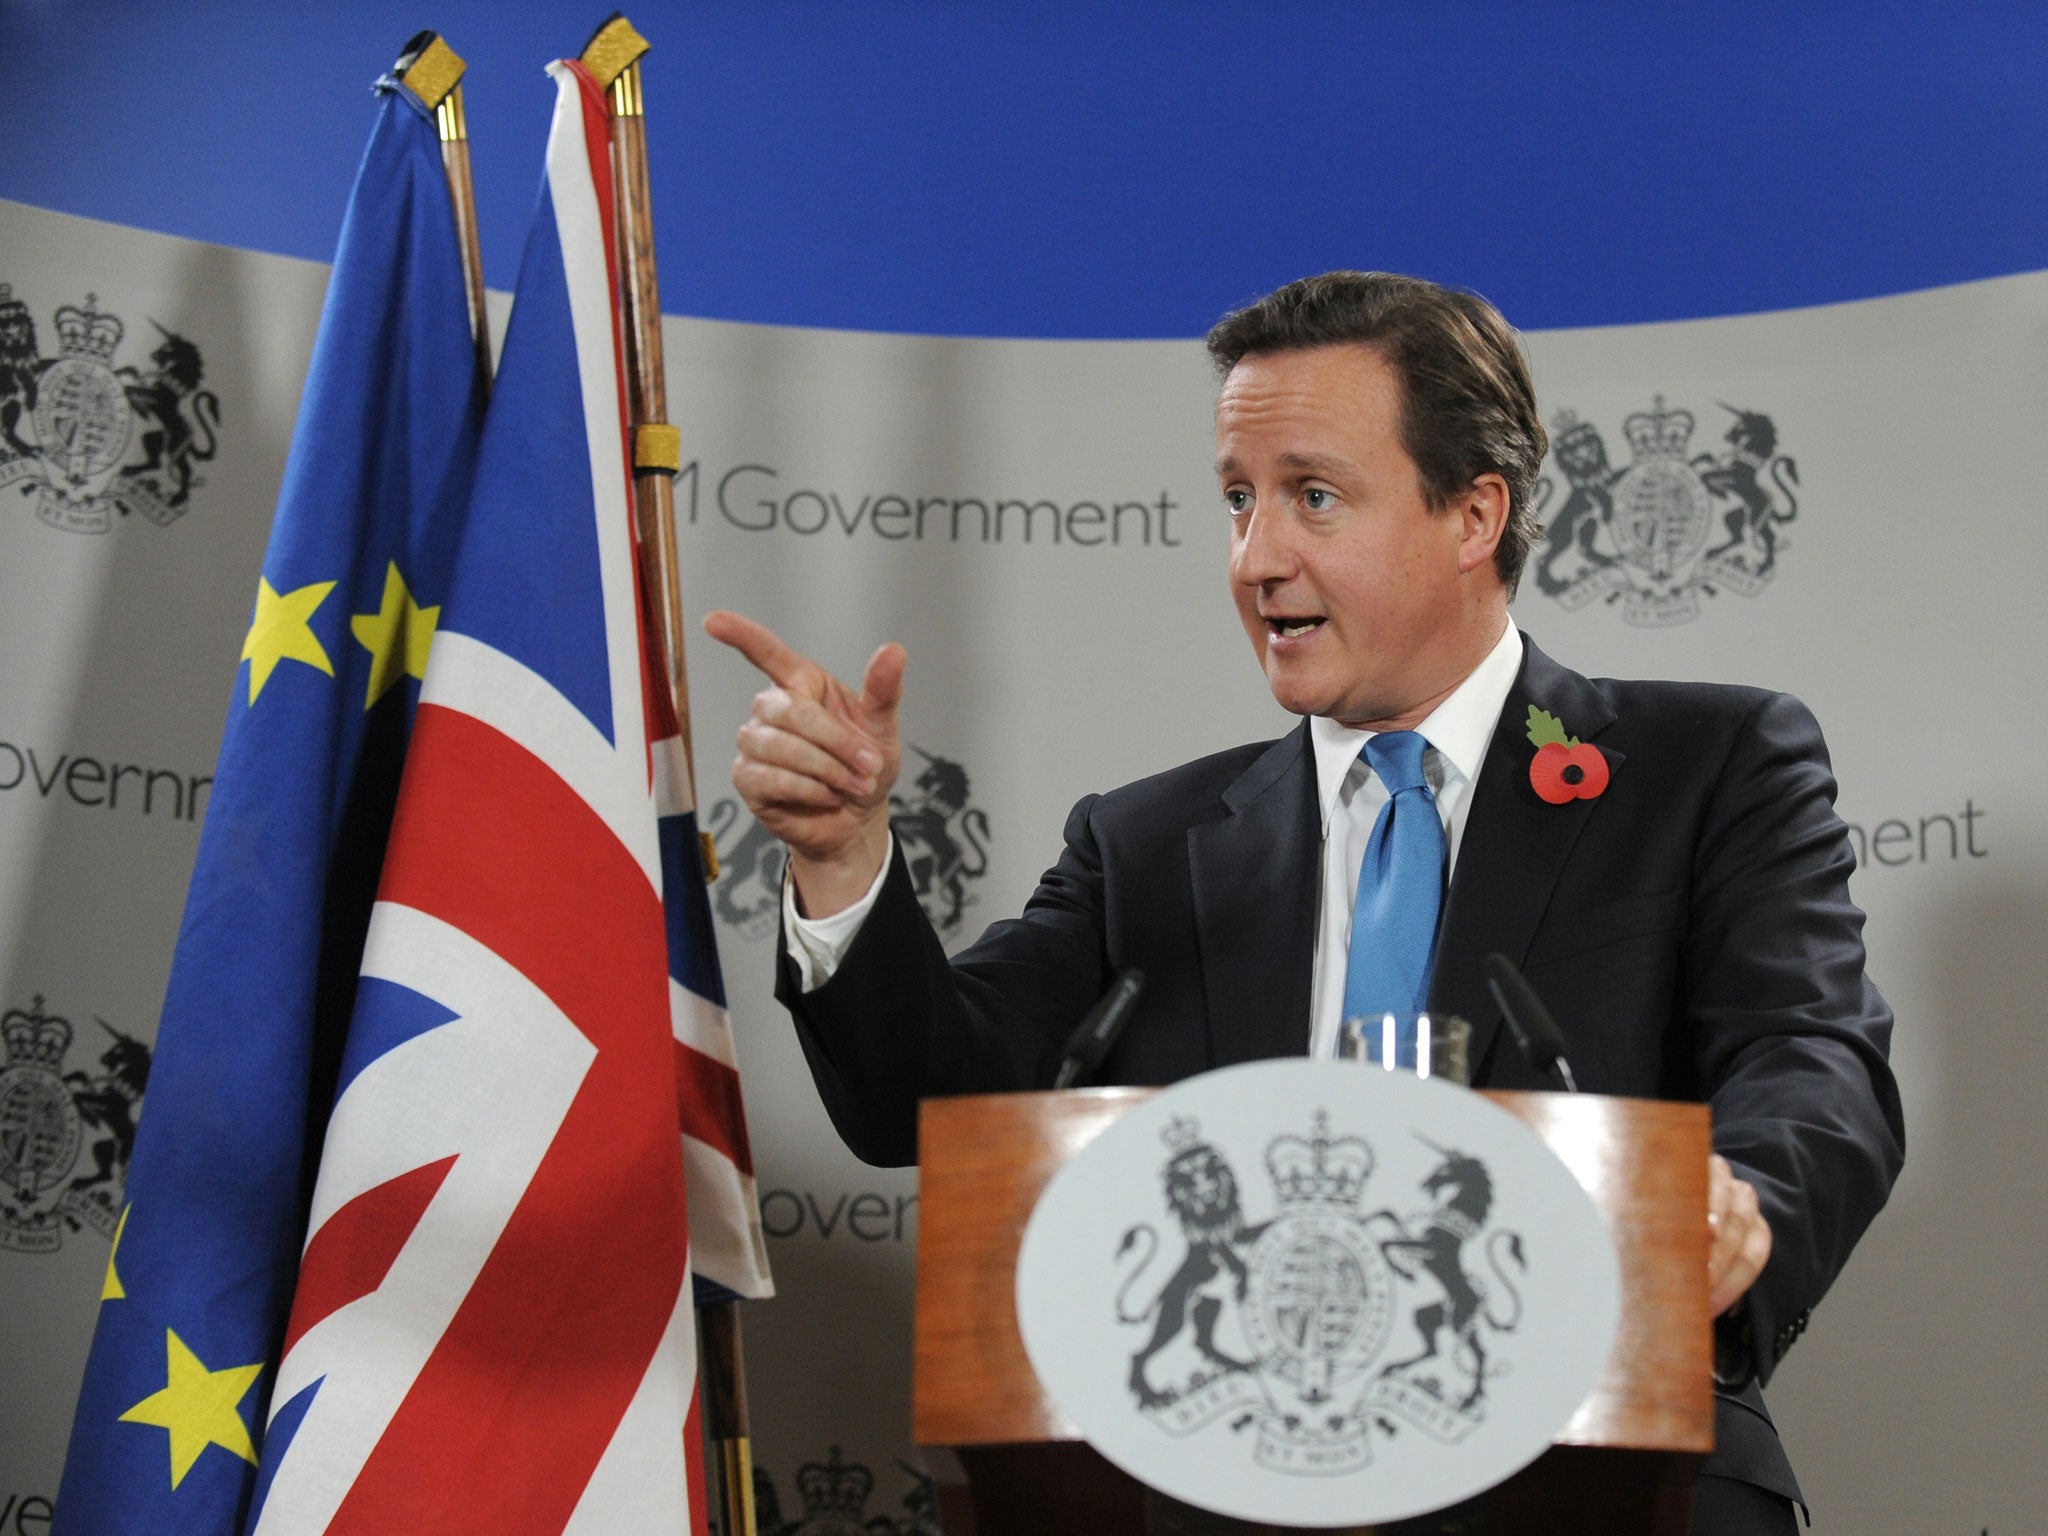 British Prime Minister David Cameron speaks during a press conference on the second day of a European Union summit on October 29, 2010 at the European Council headquarters in Brussels.